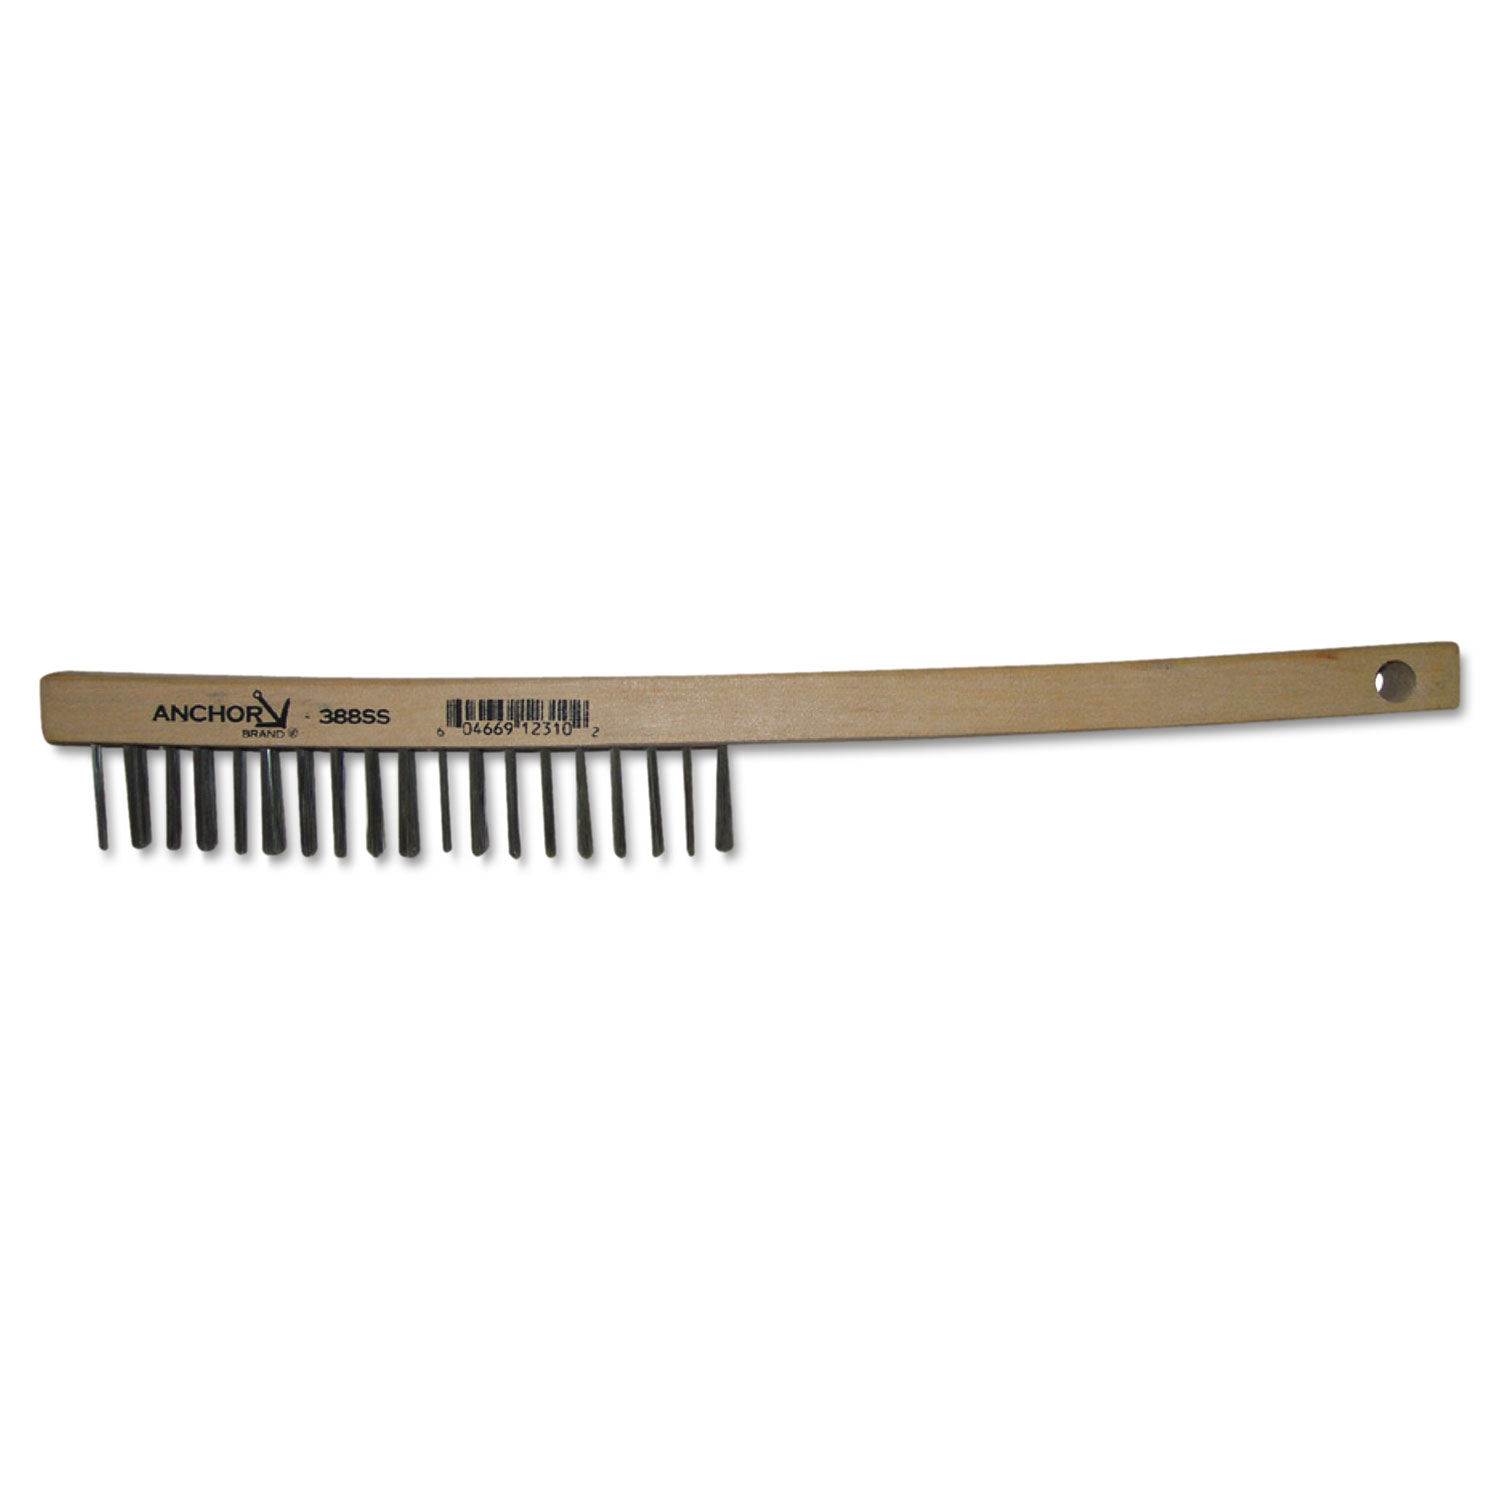 Hand Scratch Brush, Curved, Carbon Steel Shoe, Wood Handle